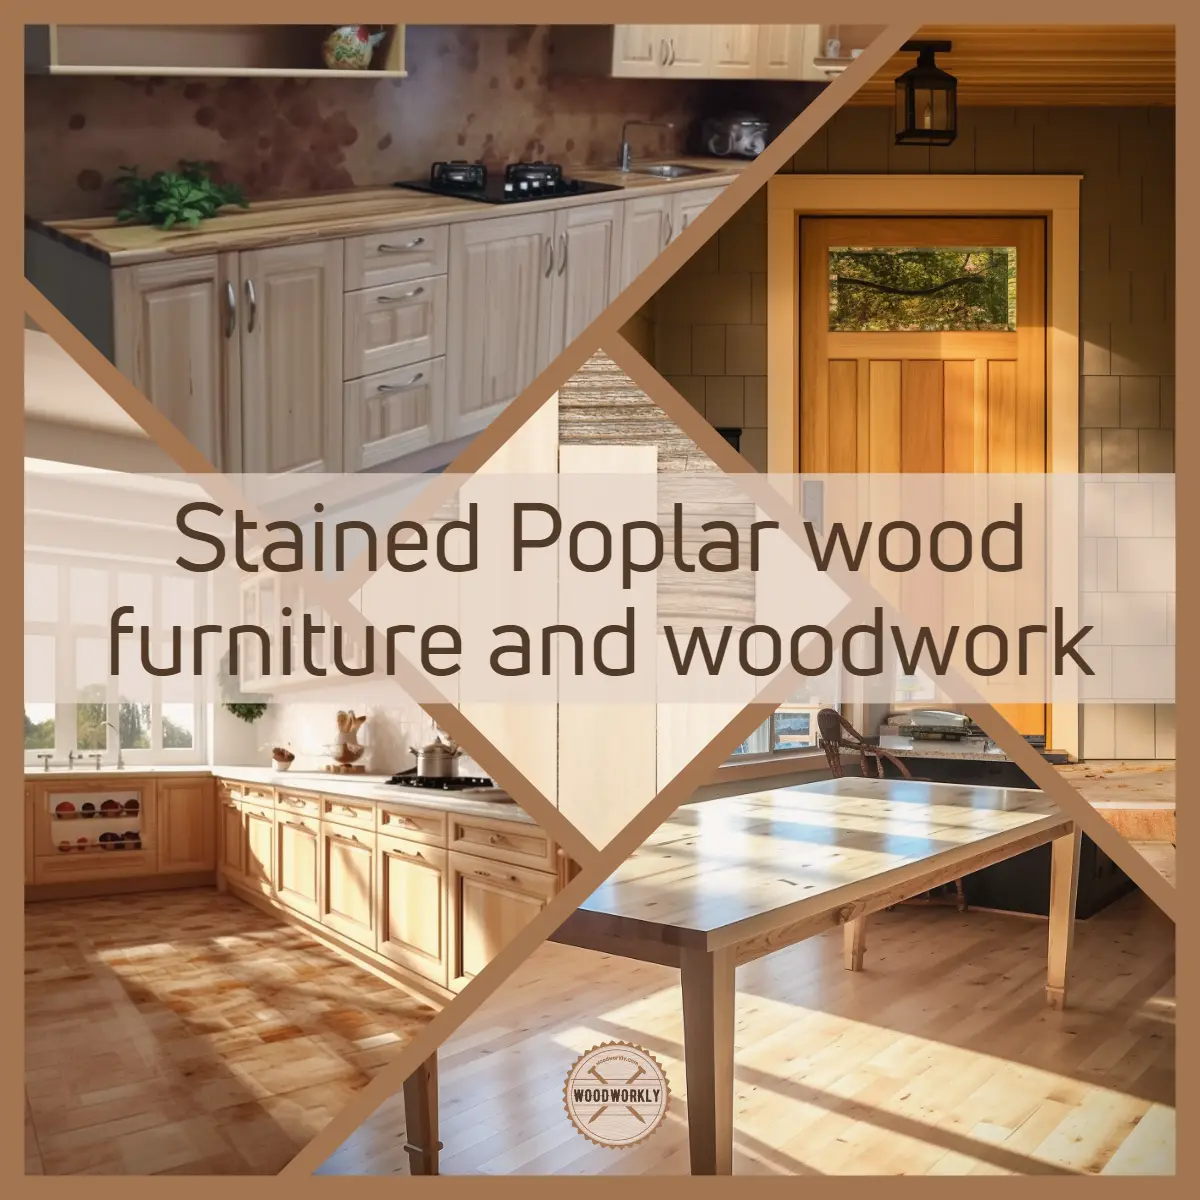 Stained Poplar wood furniture and woodwork